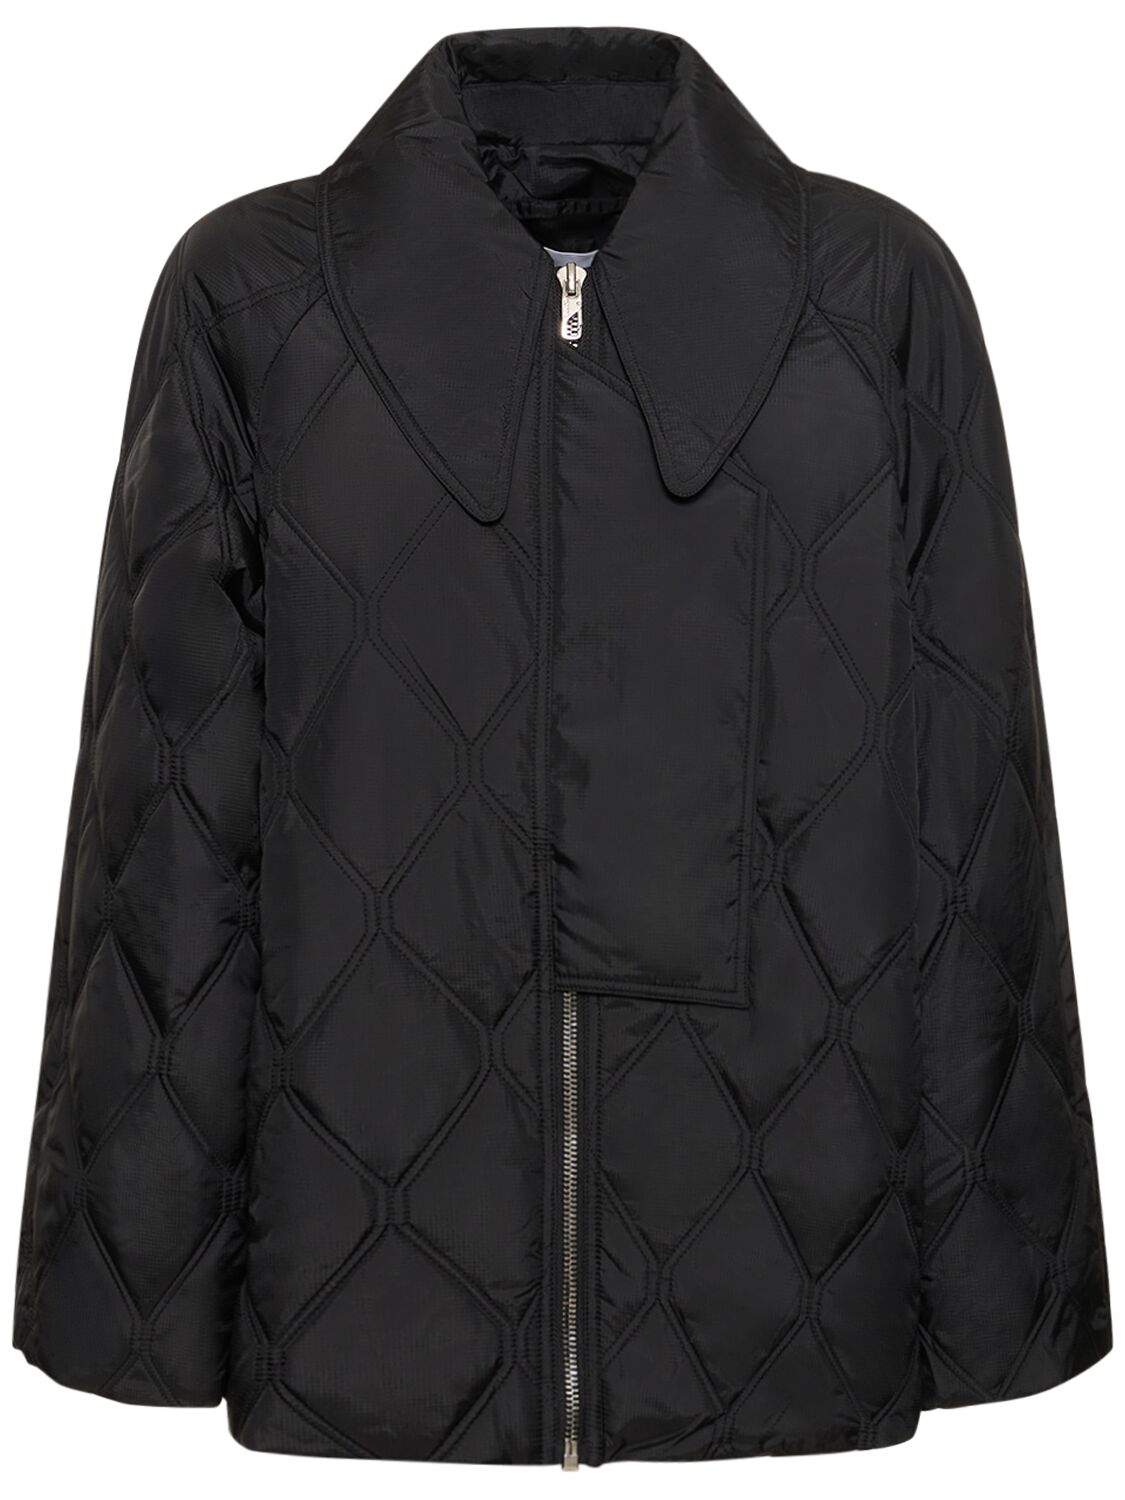 Quilted Ripstop Jacket